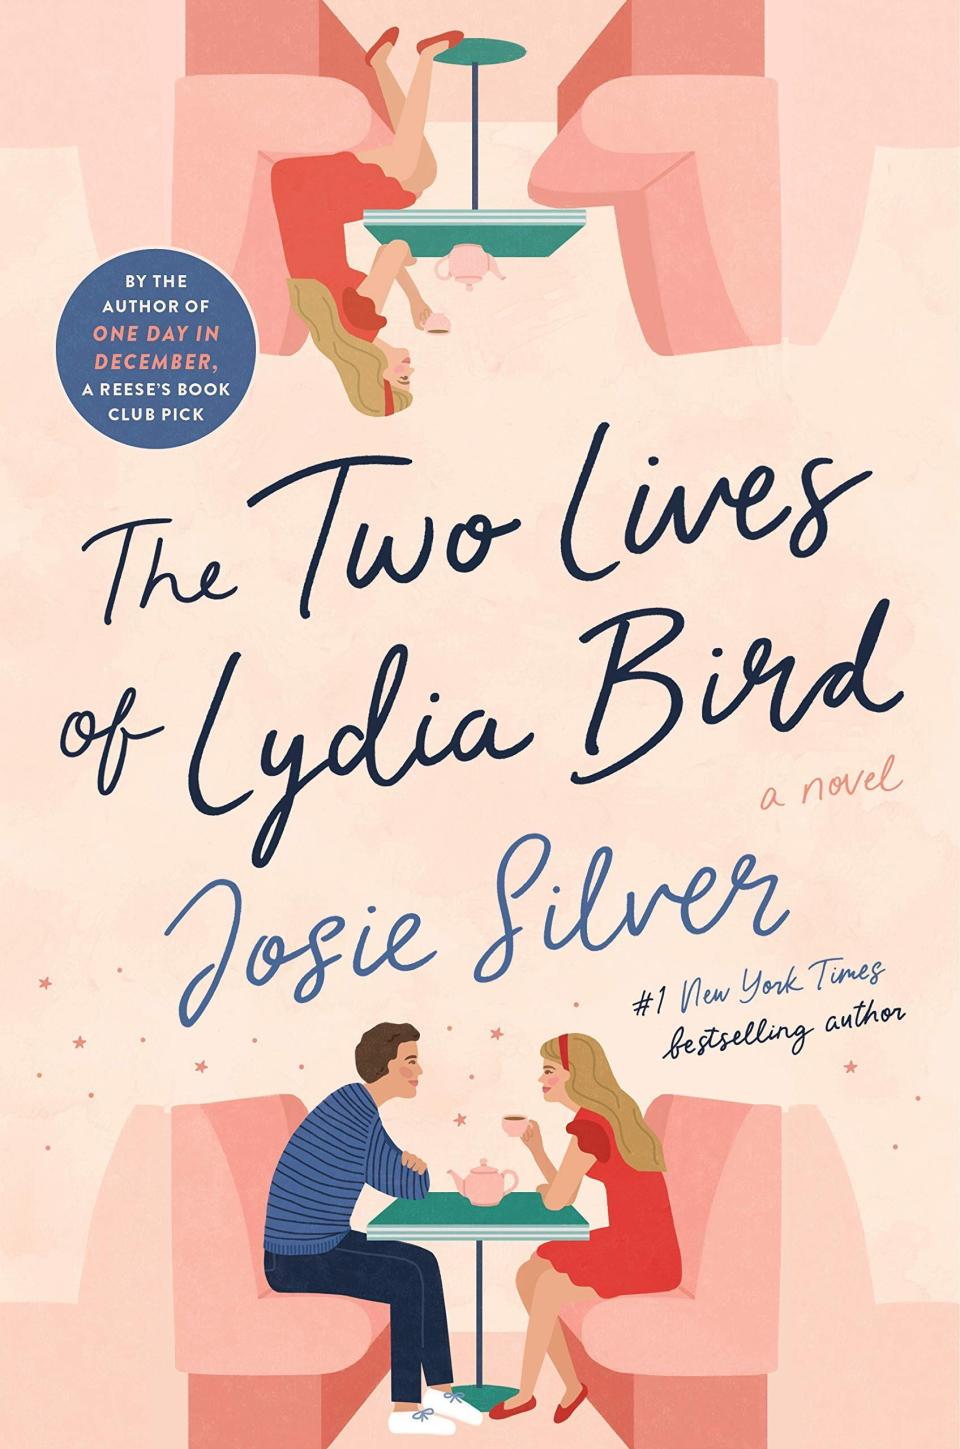 39) ‘The Two Lives of Lydia Bird’ by Josie Silver